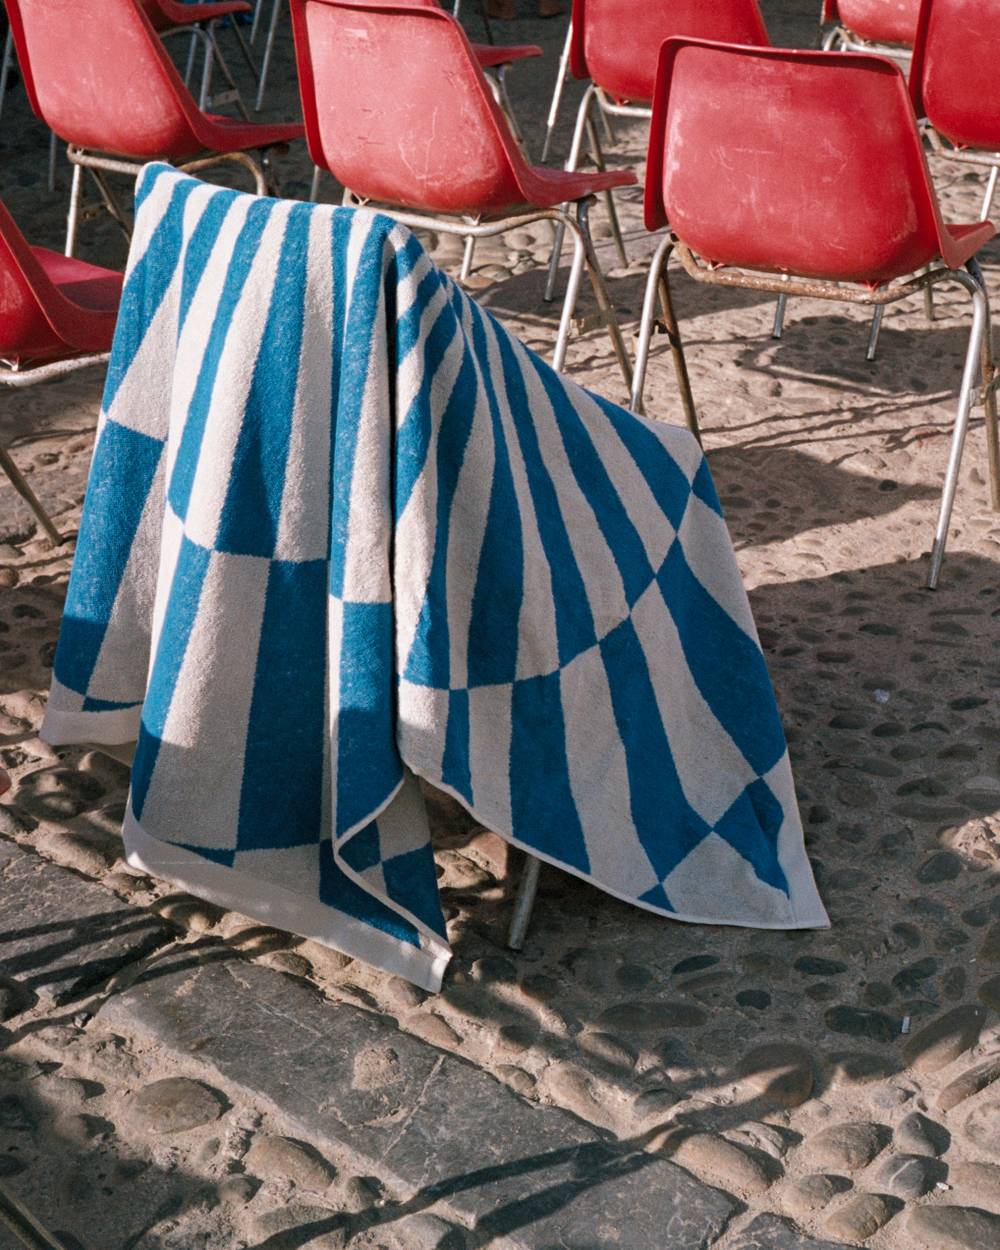 A blue and white towel hanging on a chair on a cobblestone beach. In the background you can see similar red chairs standing around.